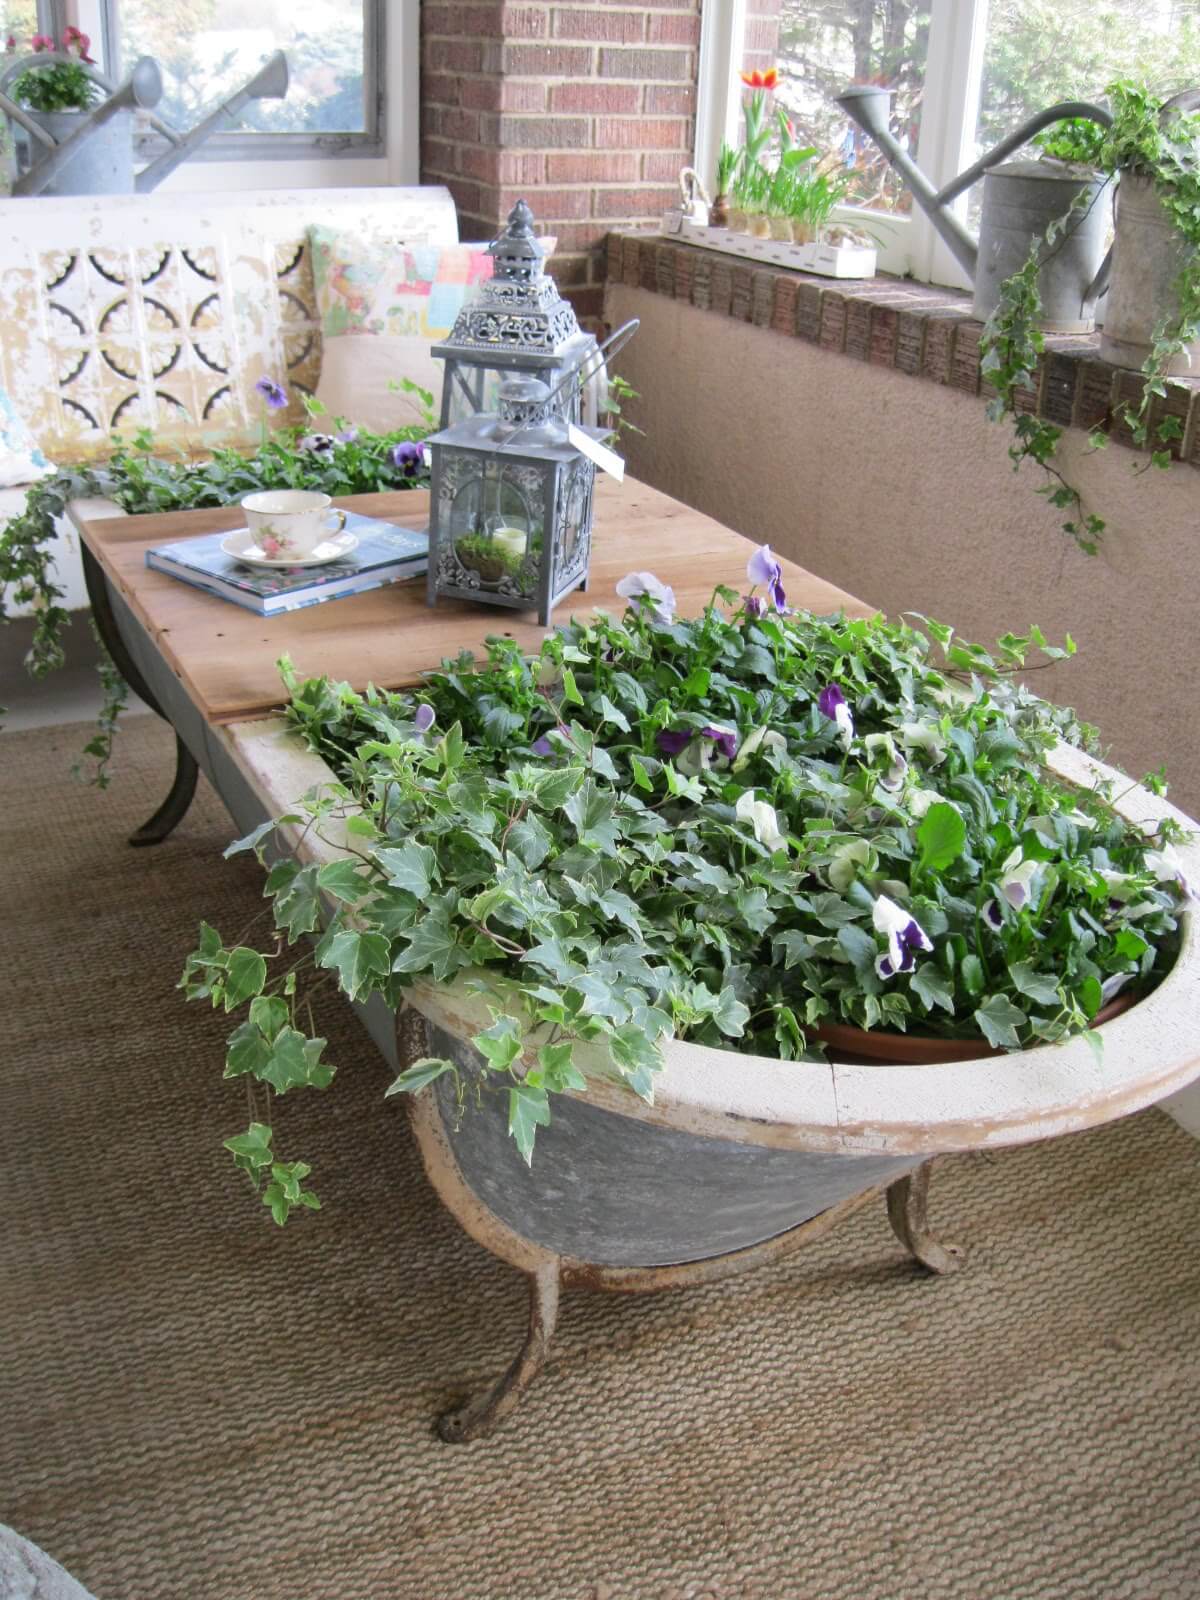 Cast Iron Tub with Pansies and Ivy